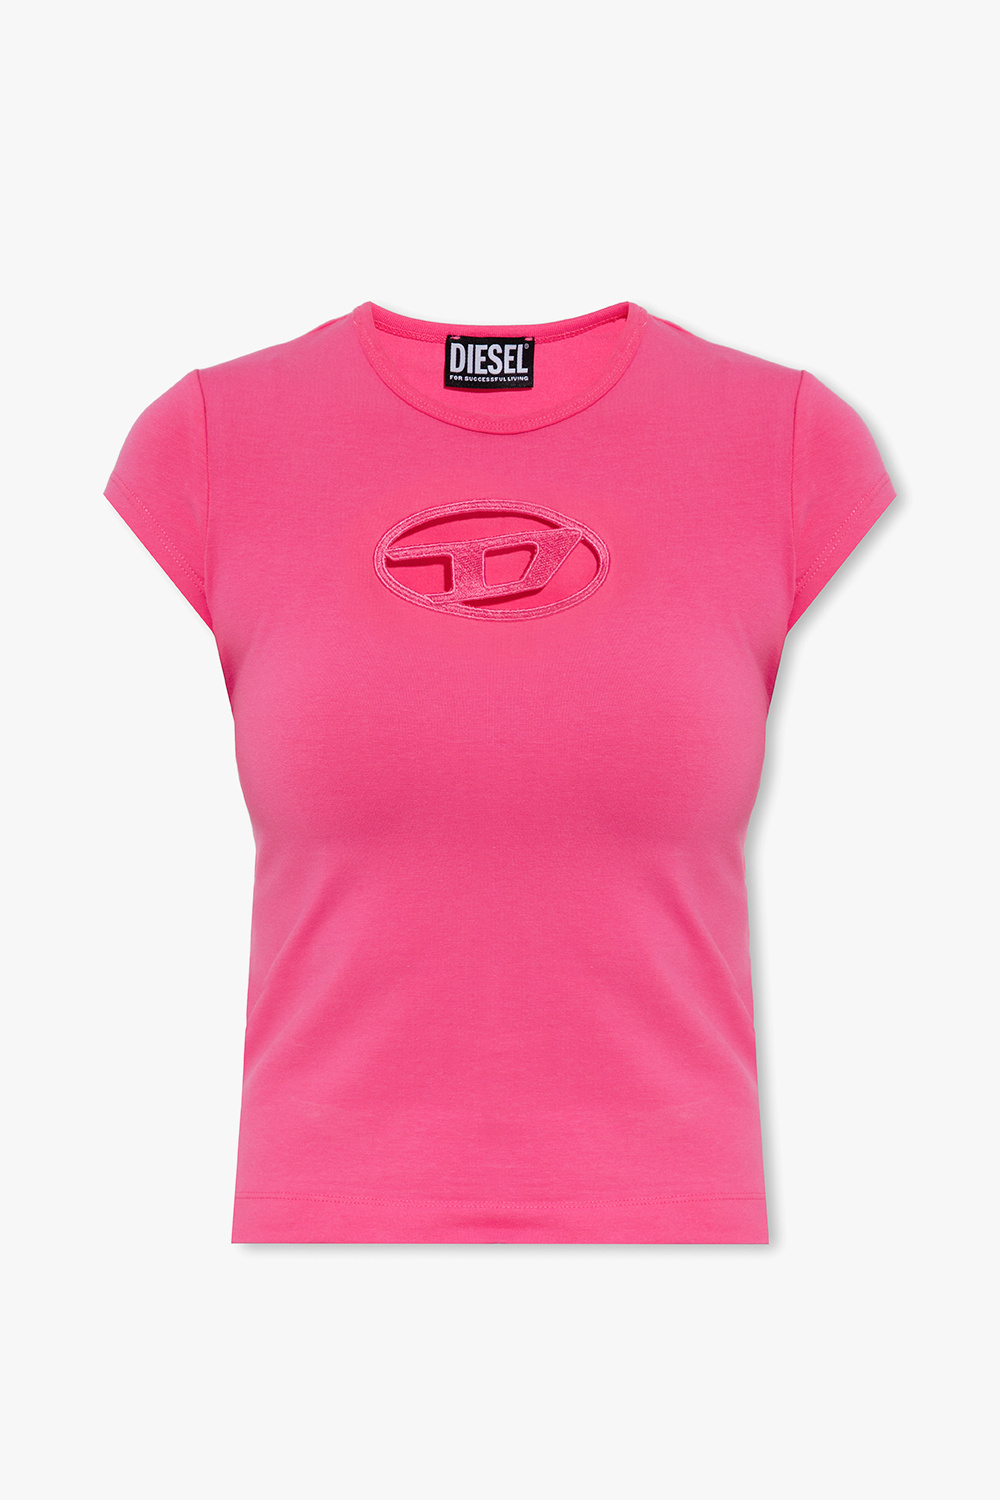 shirt with logo Diesel - Pink 'T - InteragencyboardShops Canada 